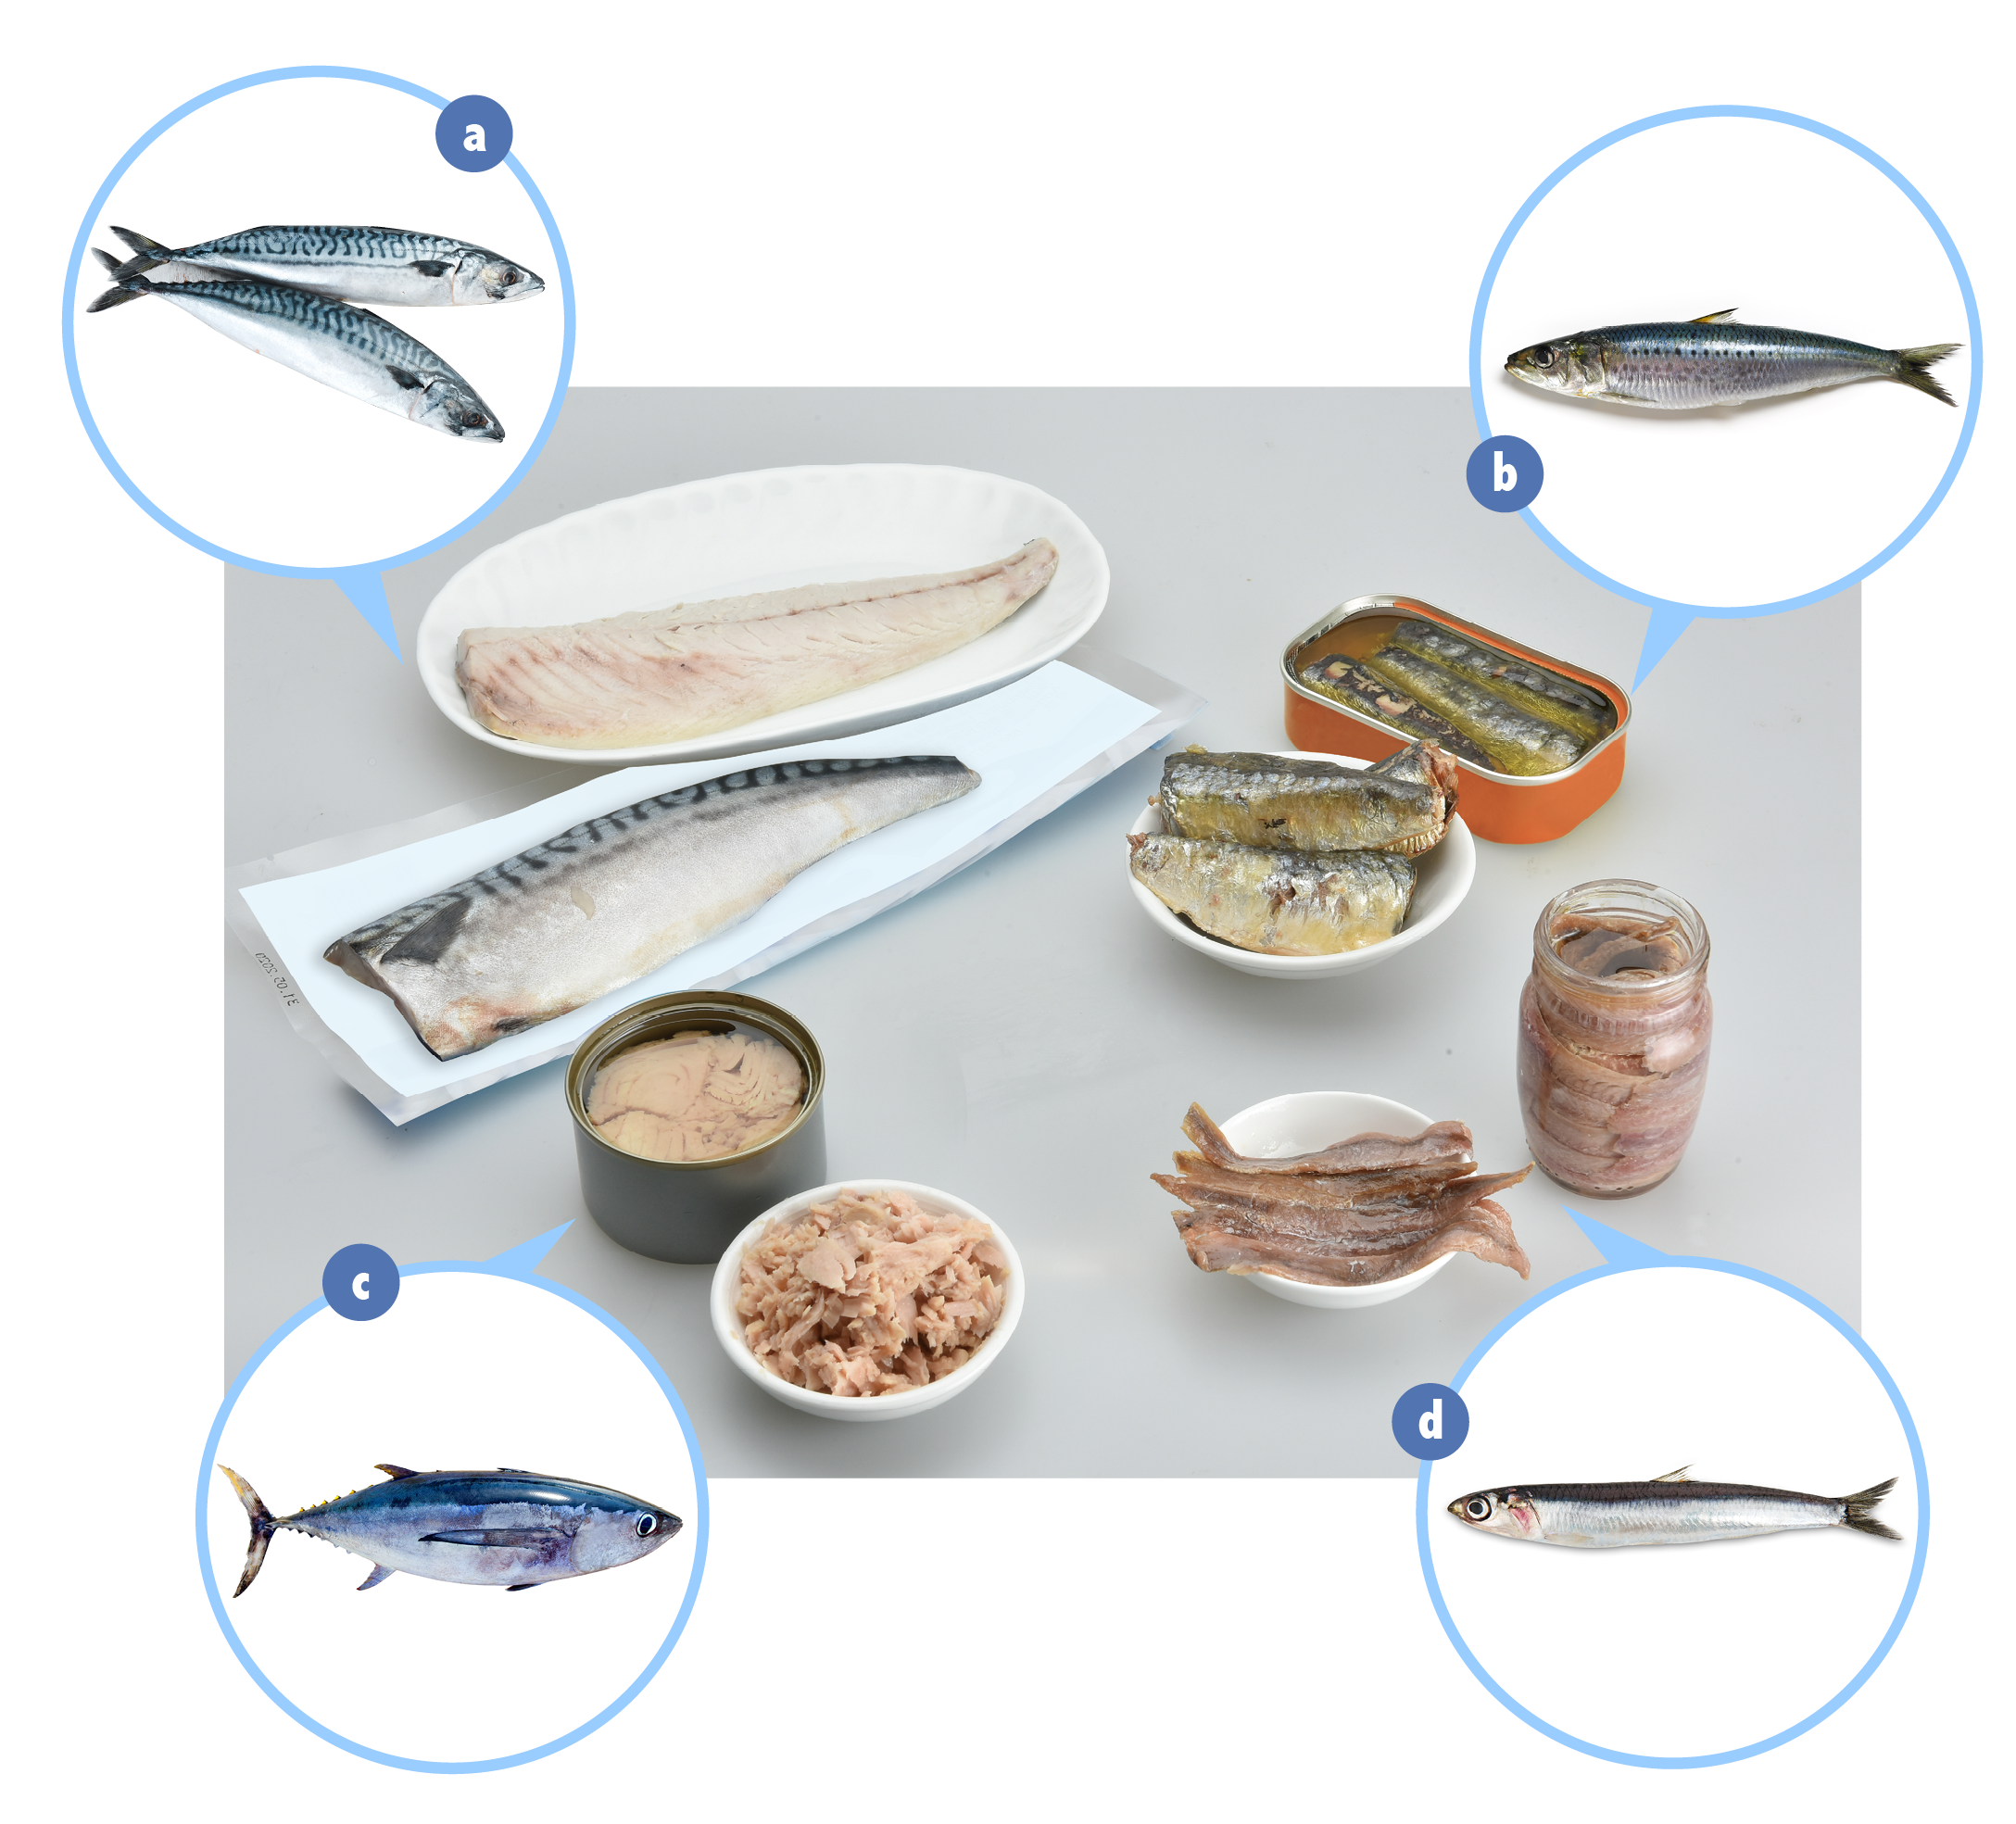 Examples of fish which contain elevated levels of naturally